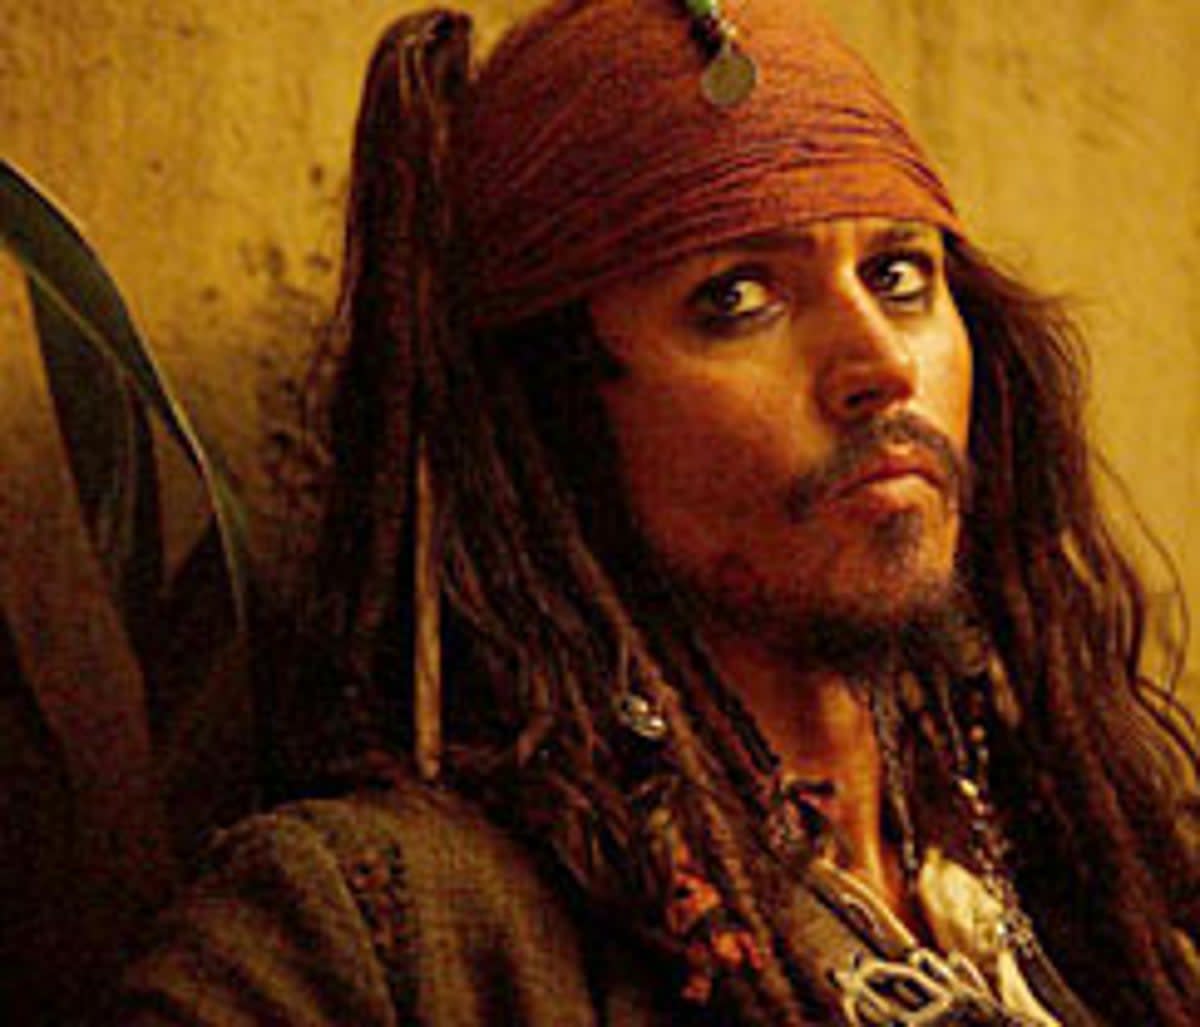 Johnny Depp has played Captain Jack Sparrow in all five Pirates of the Caribbean movies - but could miss out on the next movie 